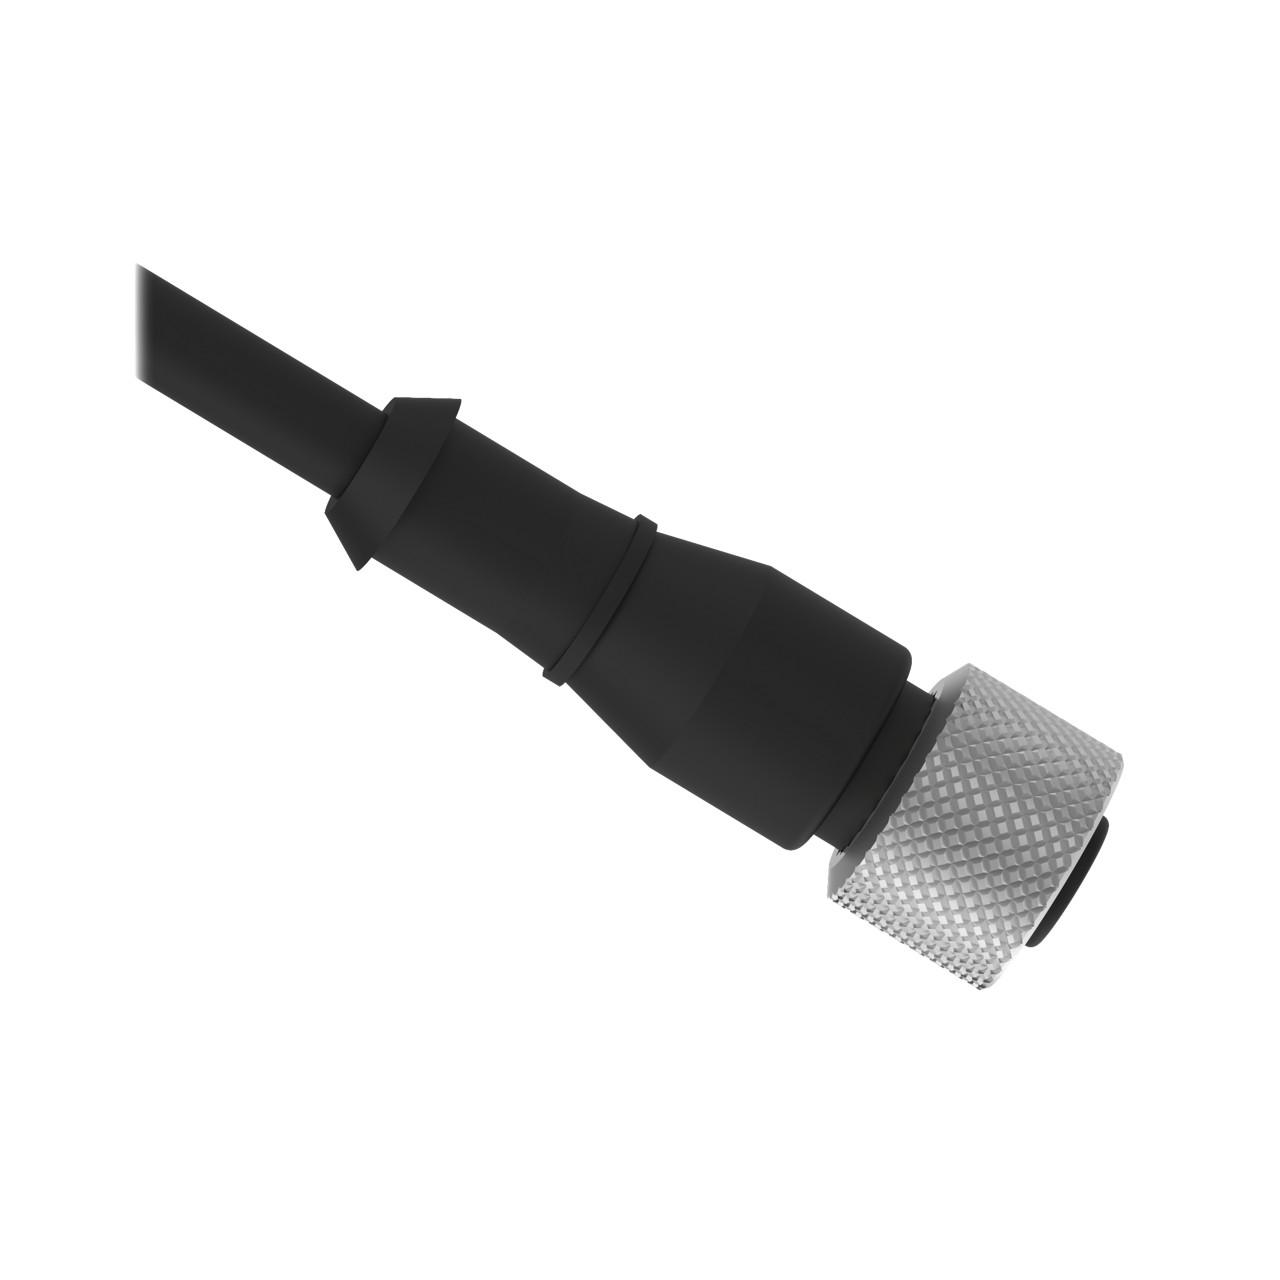 Banner MQDC-415 Euro-style Quick Disconnect Cable, 4-Pin Straight Connector, 5 m (15 ft) in Length, Nickel-plated Brass Coupling Nut.